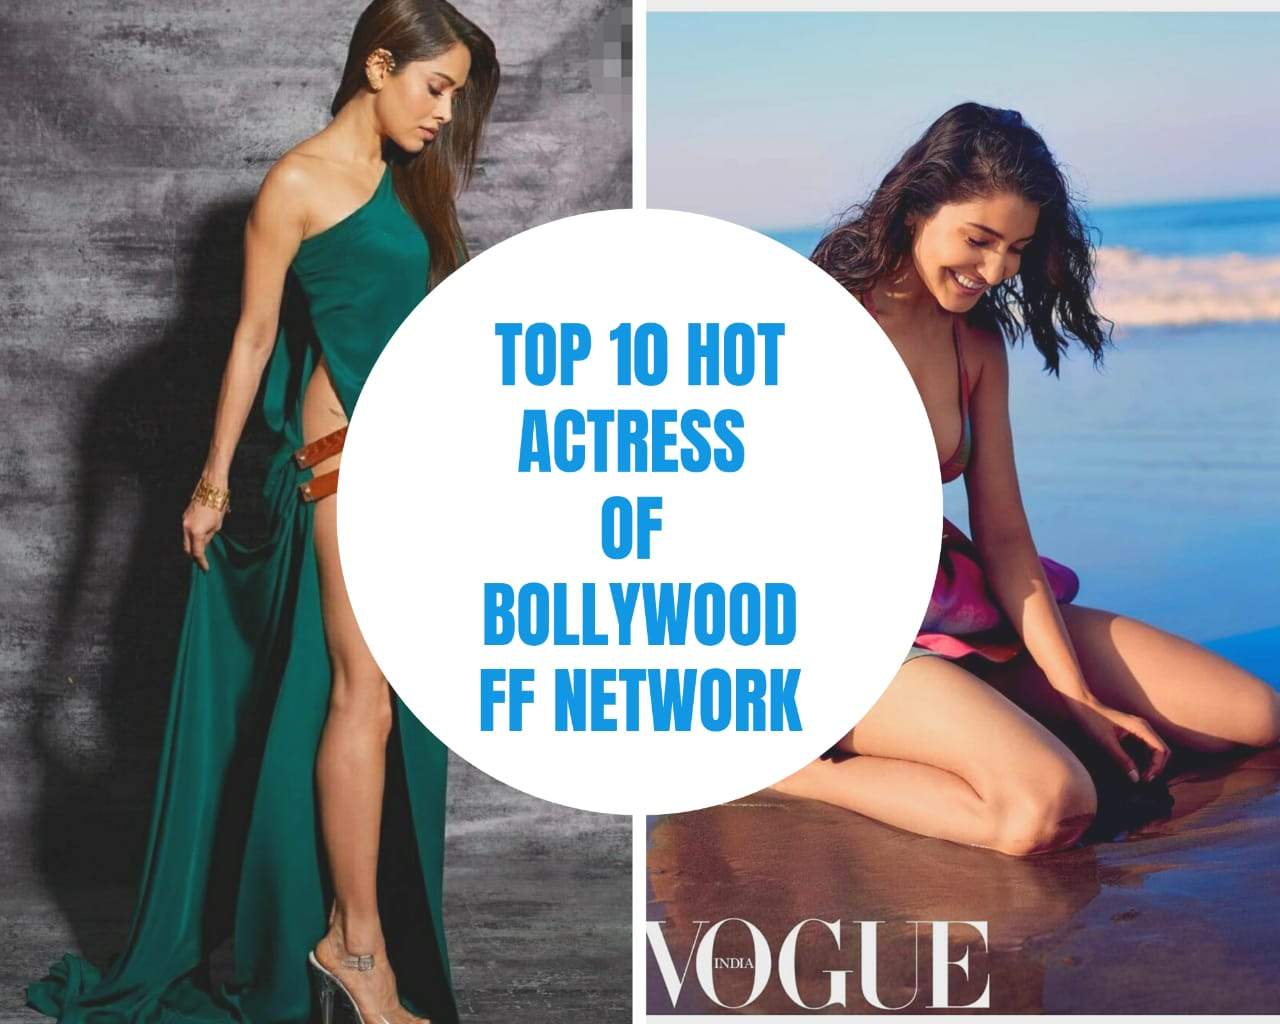 Who Are 'Top Ten' Hot Actresses of Bollywood - Filmi Files